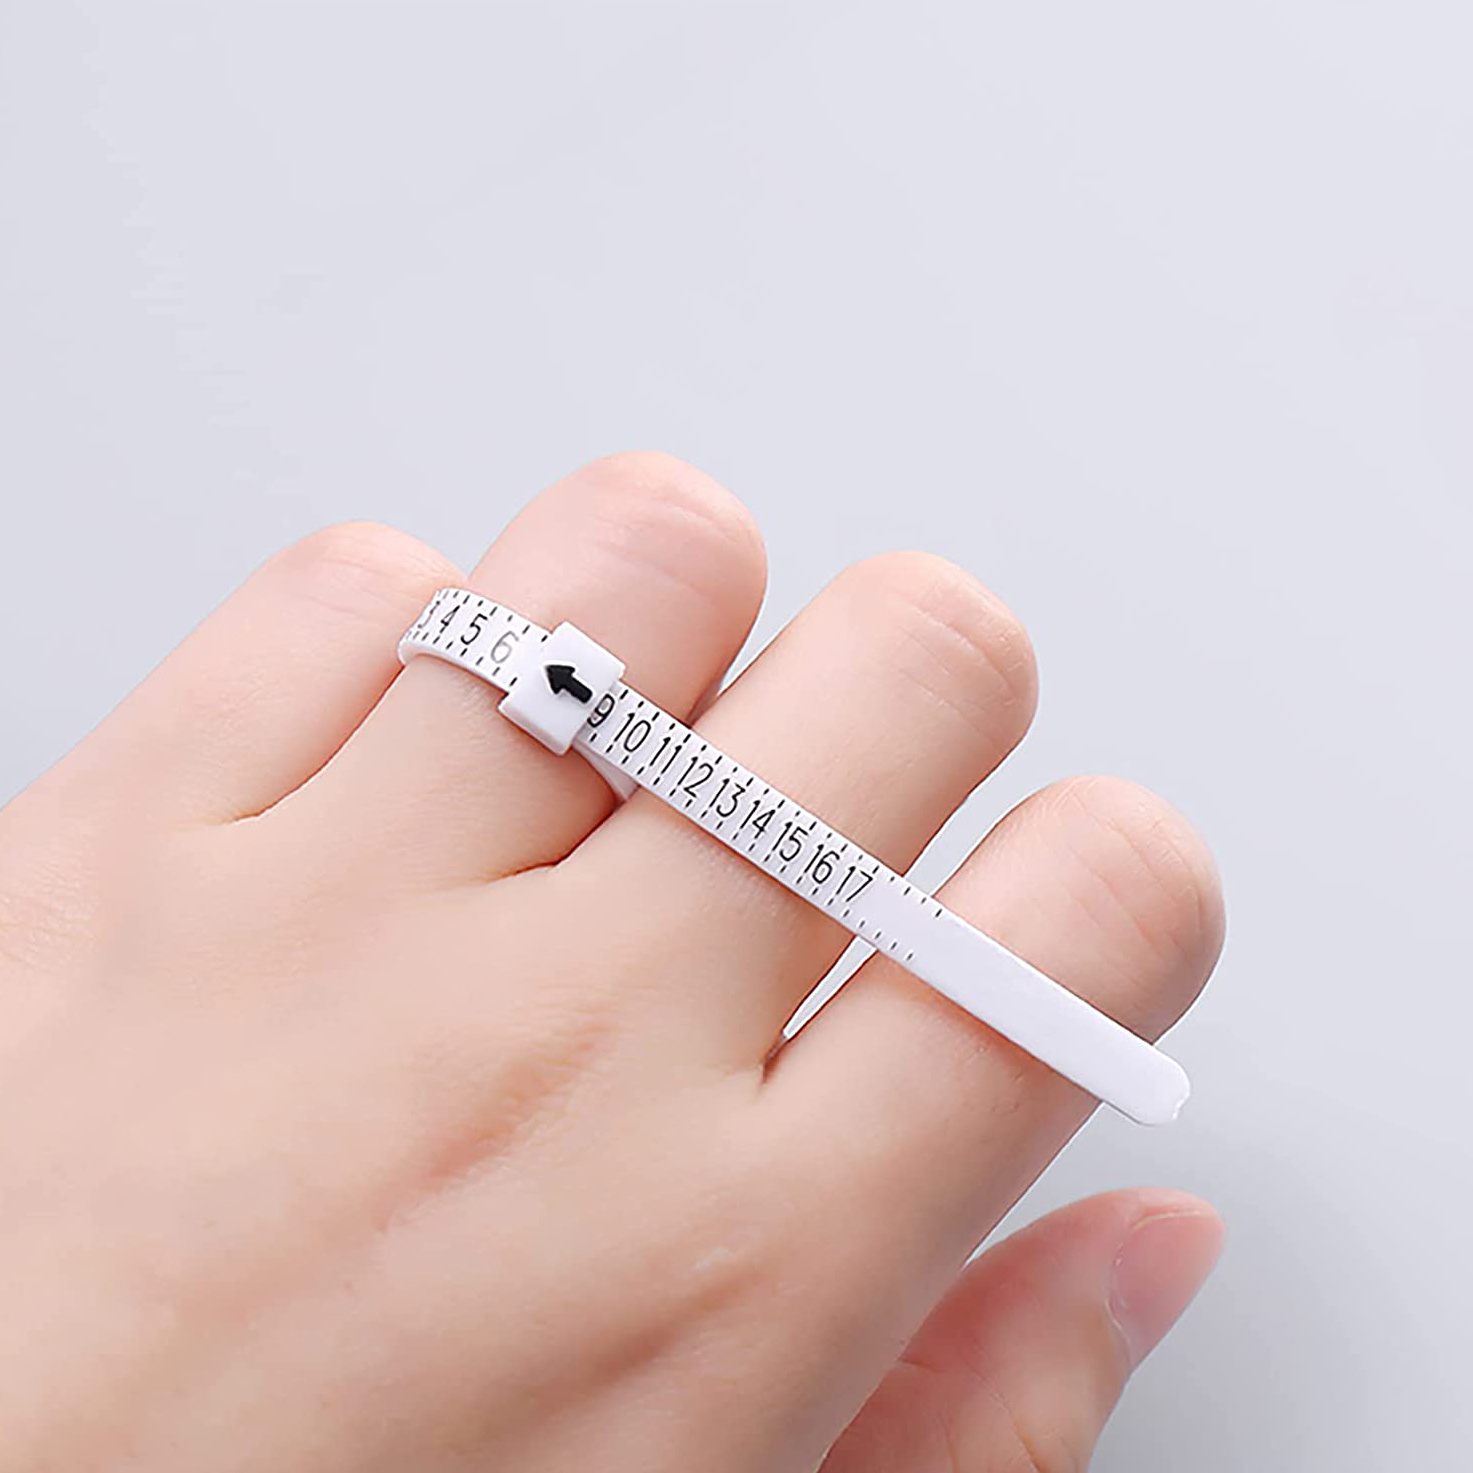 Ring Sizer, Ring Sizer Measuring Tool, Reusable Plastic Finger Size  Measuring Tape, Clear And Accurate Jewelry Sizing Making Tool 1-17 Usa  Rings Sizer - Temu Republic of Korea